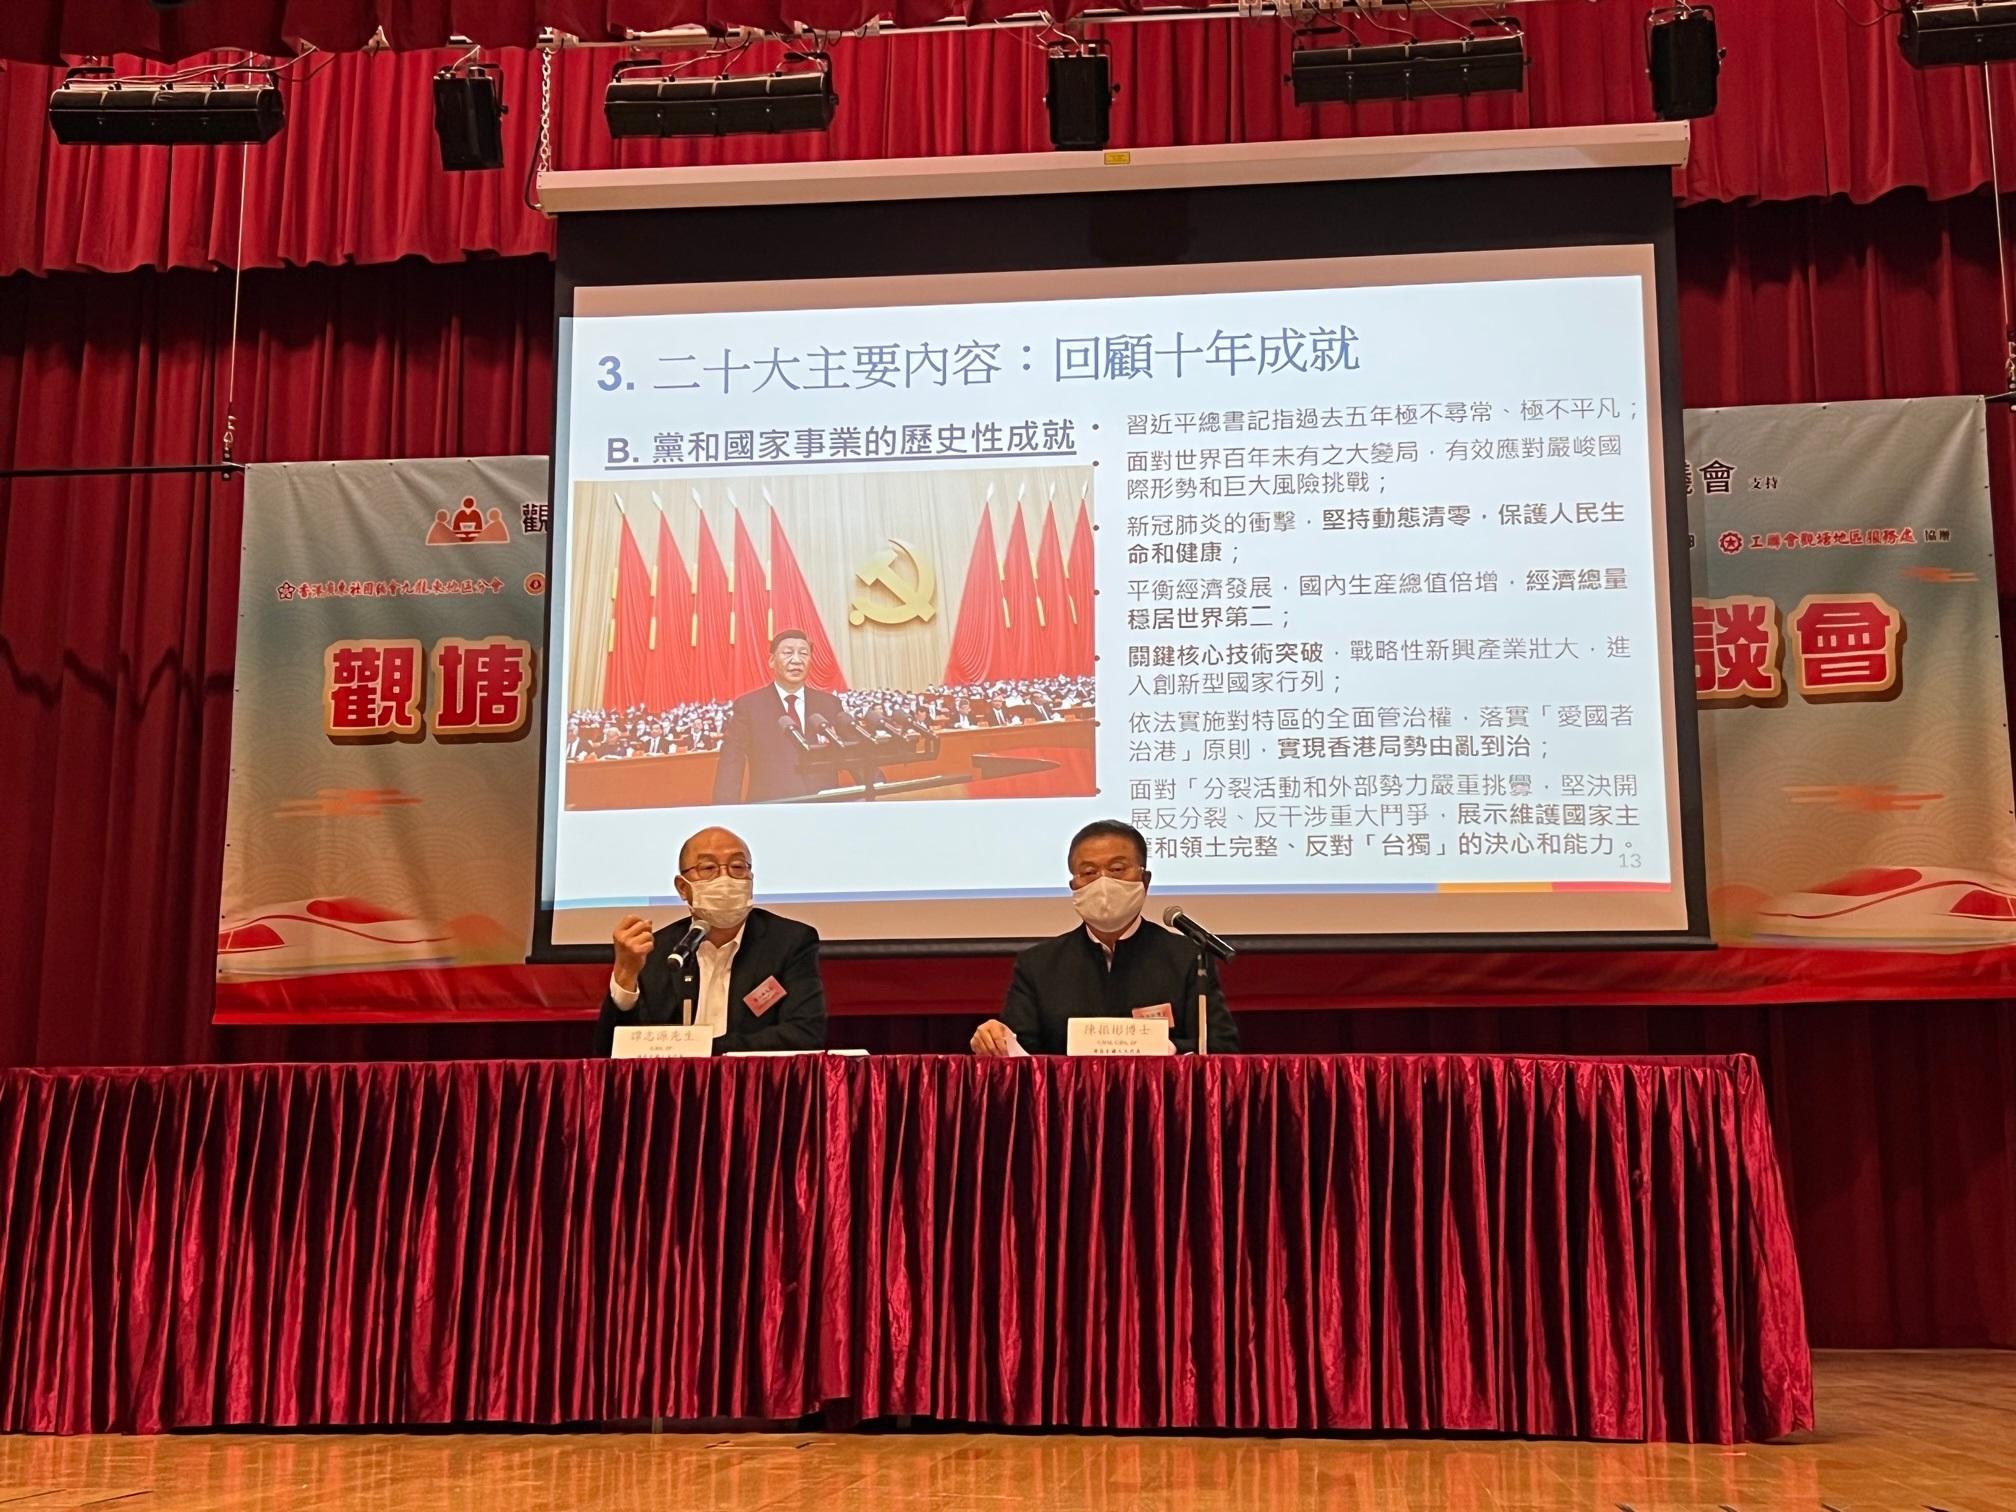 The Kwun Tong District Office yesterday (October 26) held the session on "Essence of the 20th National Congress of the Communist Party of China" with the Kowloon Federation of Associations Kwun Tong District Committee at Sau Mau Ping Community Hall. Photo shows Hong Kong deputies to the National People's Congress Dr Bunny Chan (right) and Mr Raymond Tam (left) lecturing on stage.